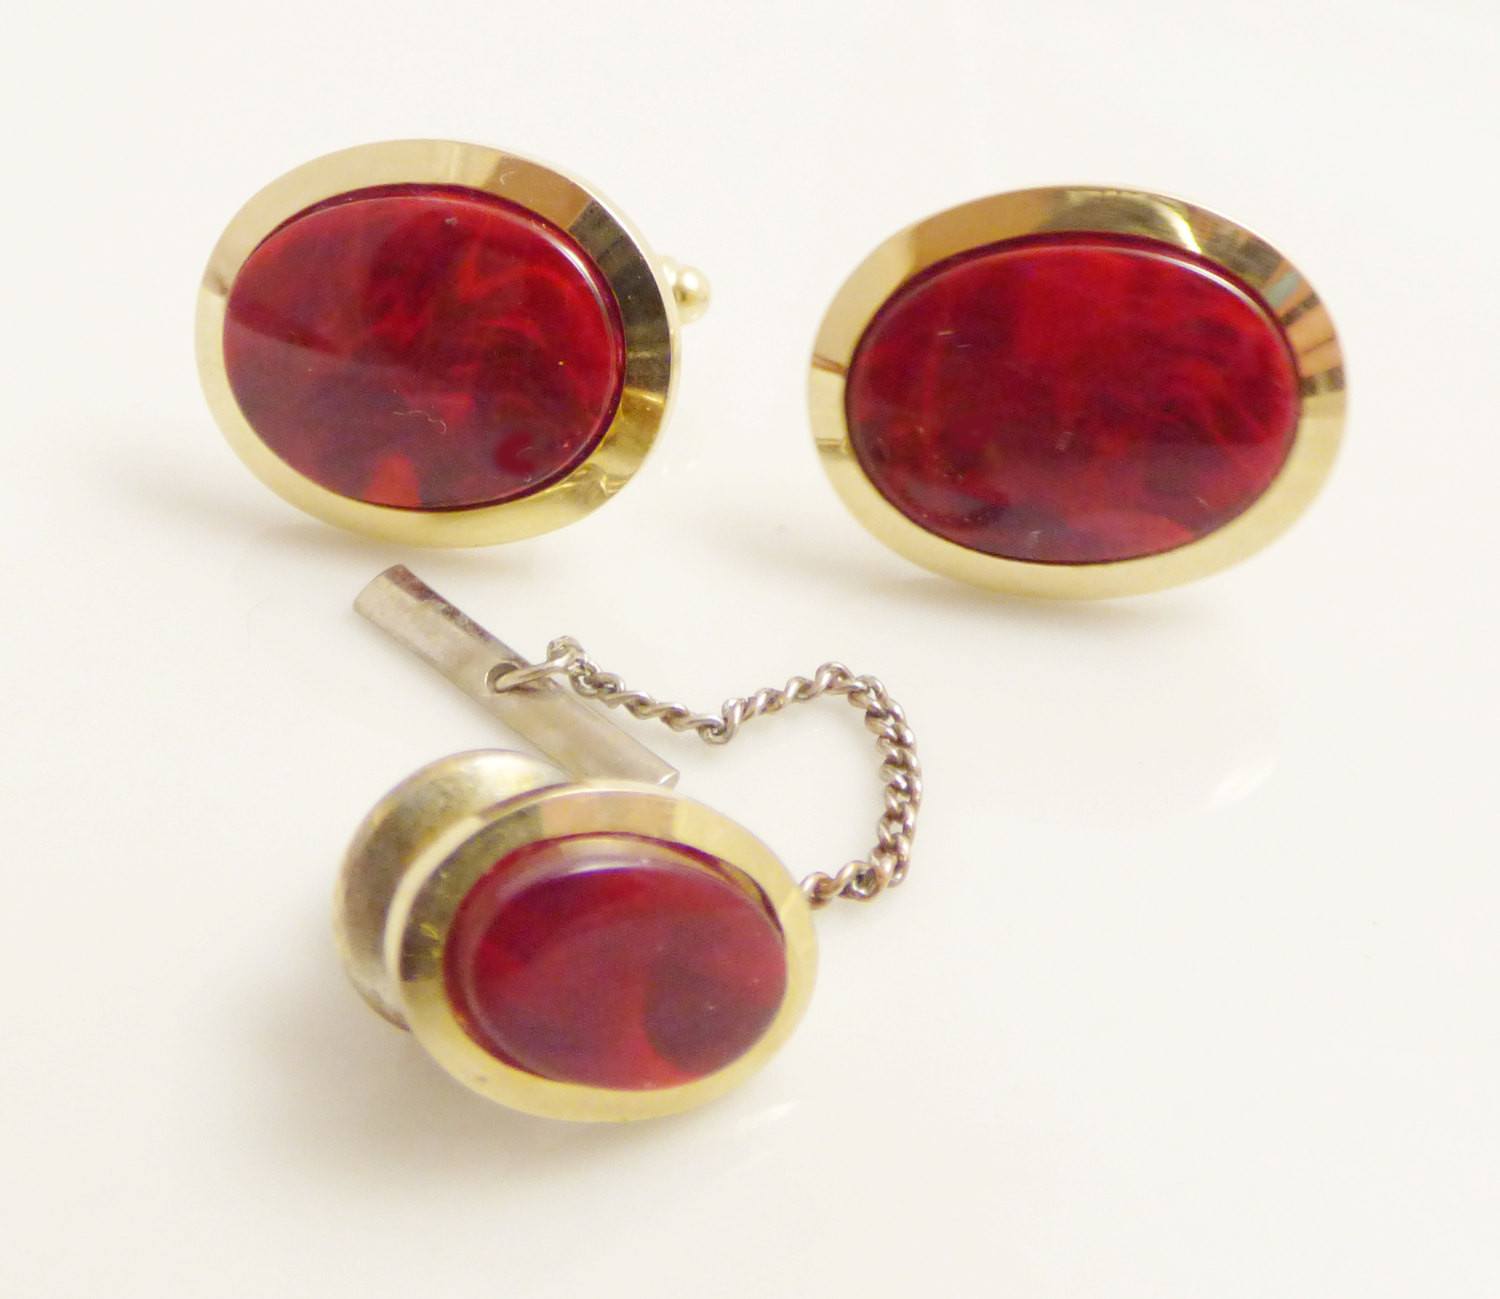 Vintage Anson gold tone Red Marbleized Stone Cufflinks and Tie Tack Set